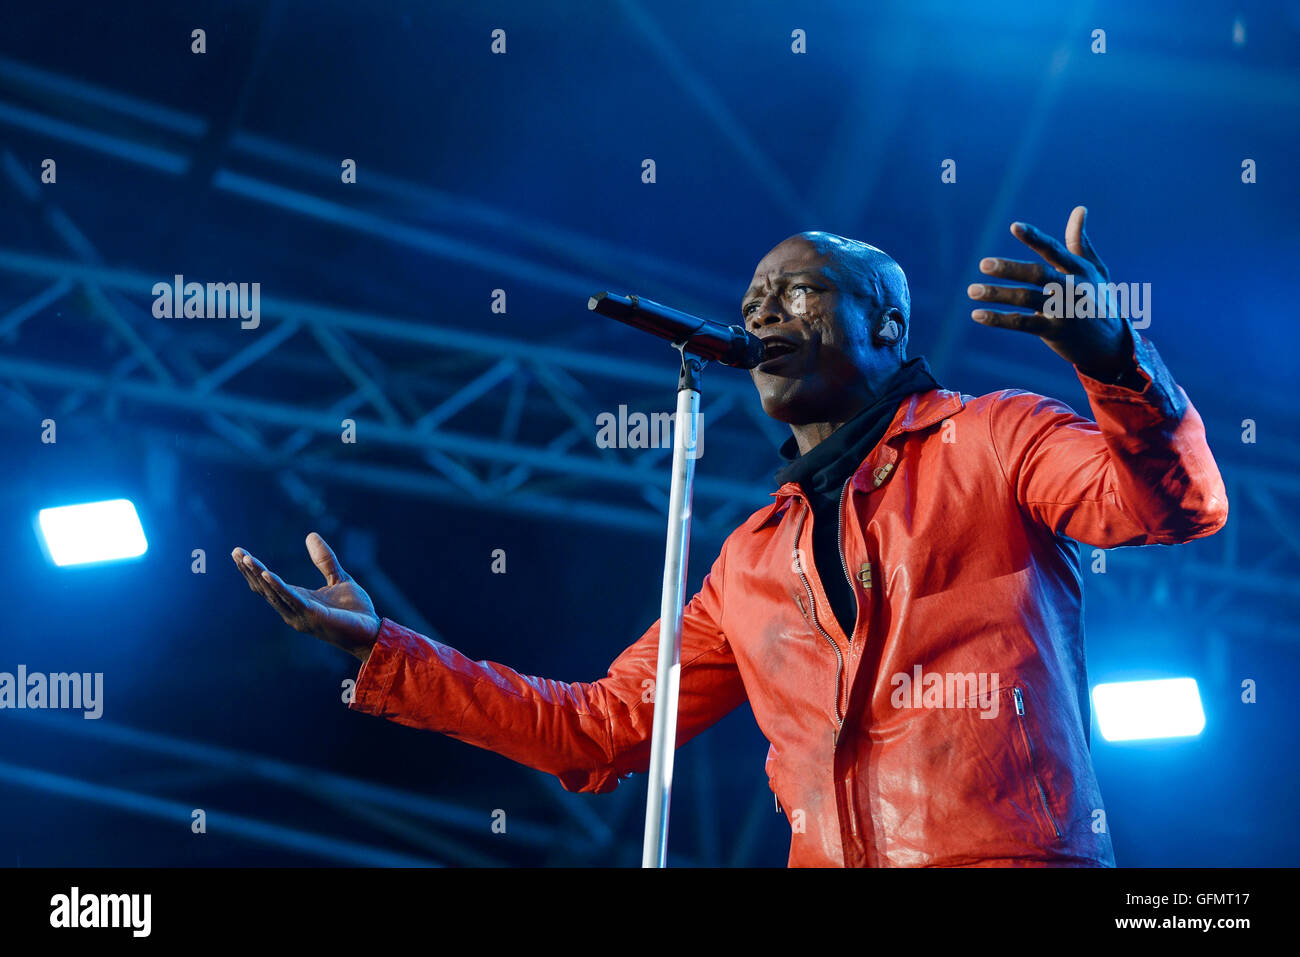 Carfest North, Bolesworth, Cheshire, UK. 31st July 2016. Seal performing on the main stage. The event is the brainchild of Chris Evans and features 3 days of cars, music and entertainment with profits being donated to the charity Children in Need. Andrew Paterson/Alamy Live News Stock Photo